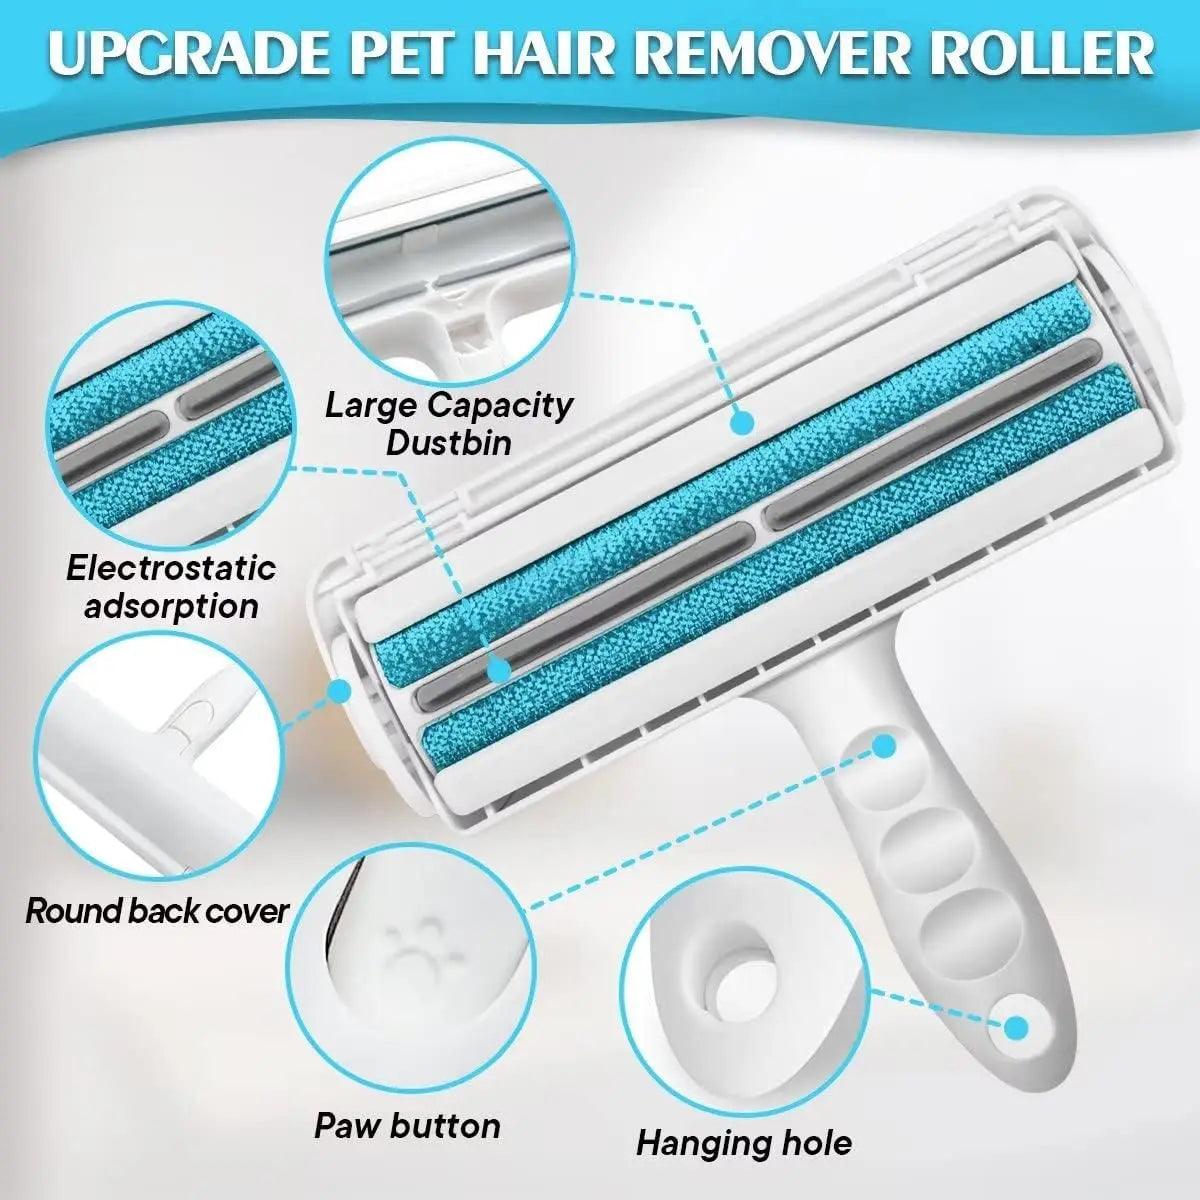 Pet Hair Remover Roller - Dog & Cat Fur Remover with Self-Cleaning Base - Efficient Animal Hair Removal Tool - Perfect for Furni - Animalerie en ligne Kat-Shop